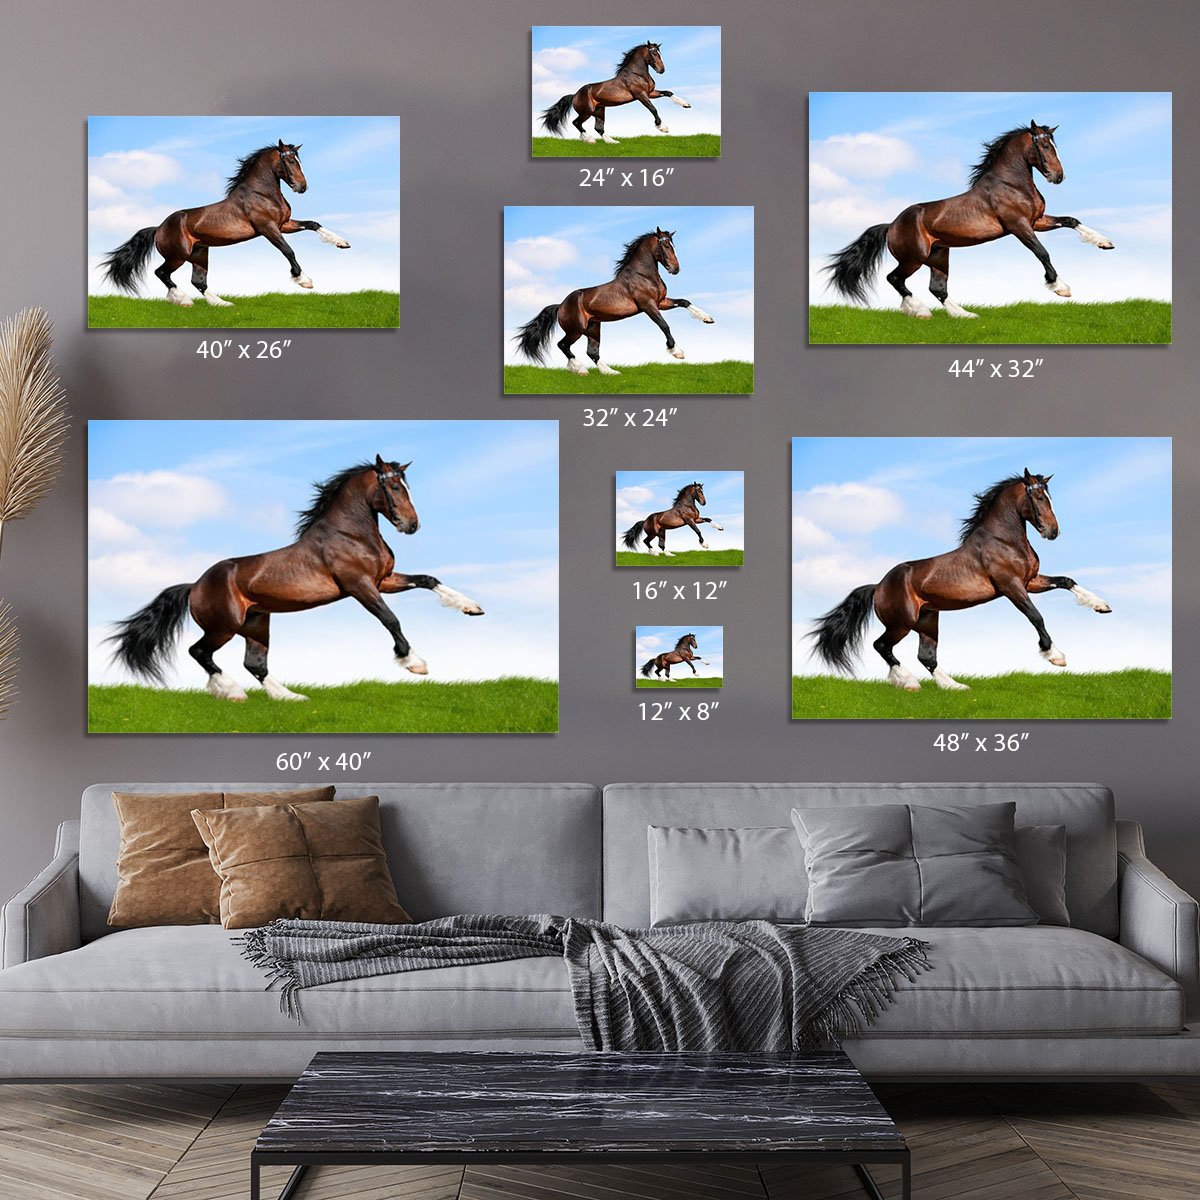 Bay horse running in field Canvas Print or Poster